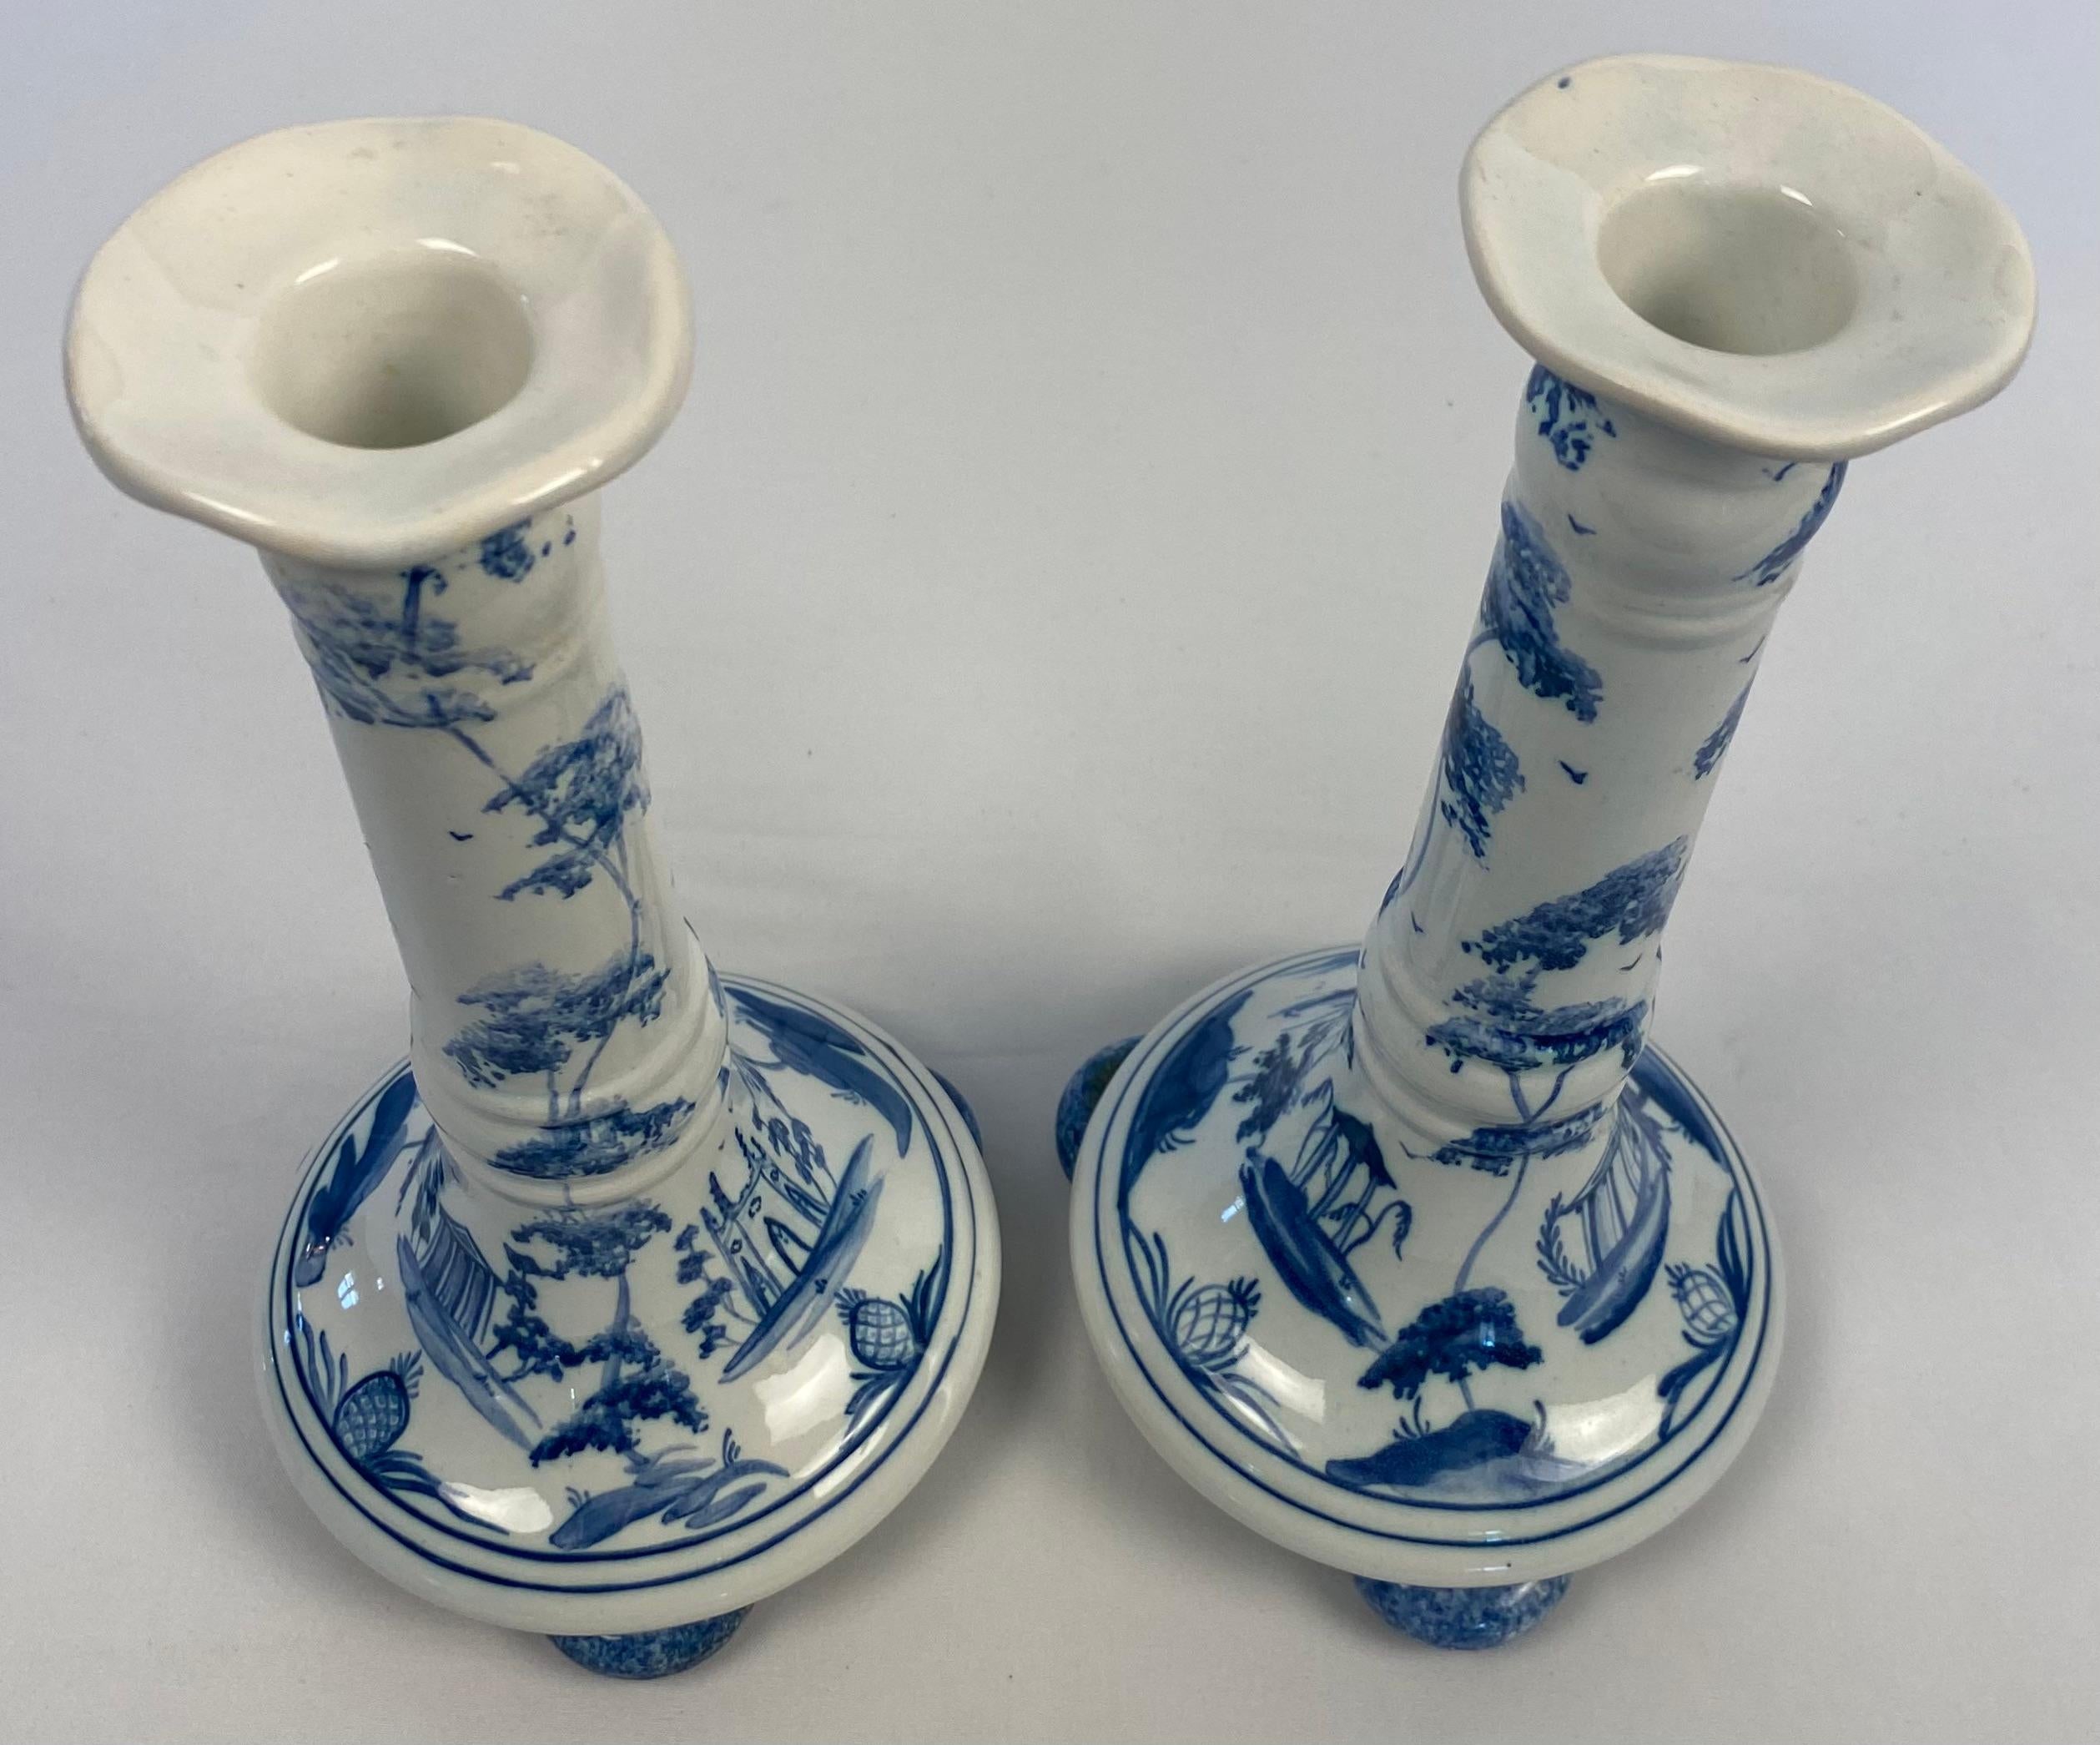 A fine pair of blue and white Delft porcelain candle holders. 
Crafted in England.
 
Decorated with floral motifs and embellished with traditional decor.
Excellent condition and are stamped on the bottom for further authentication.
Measures: 8 3/8